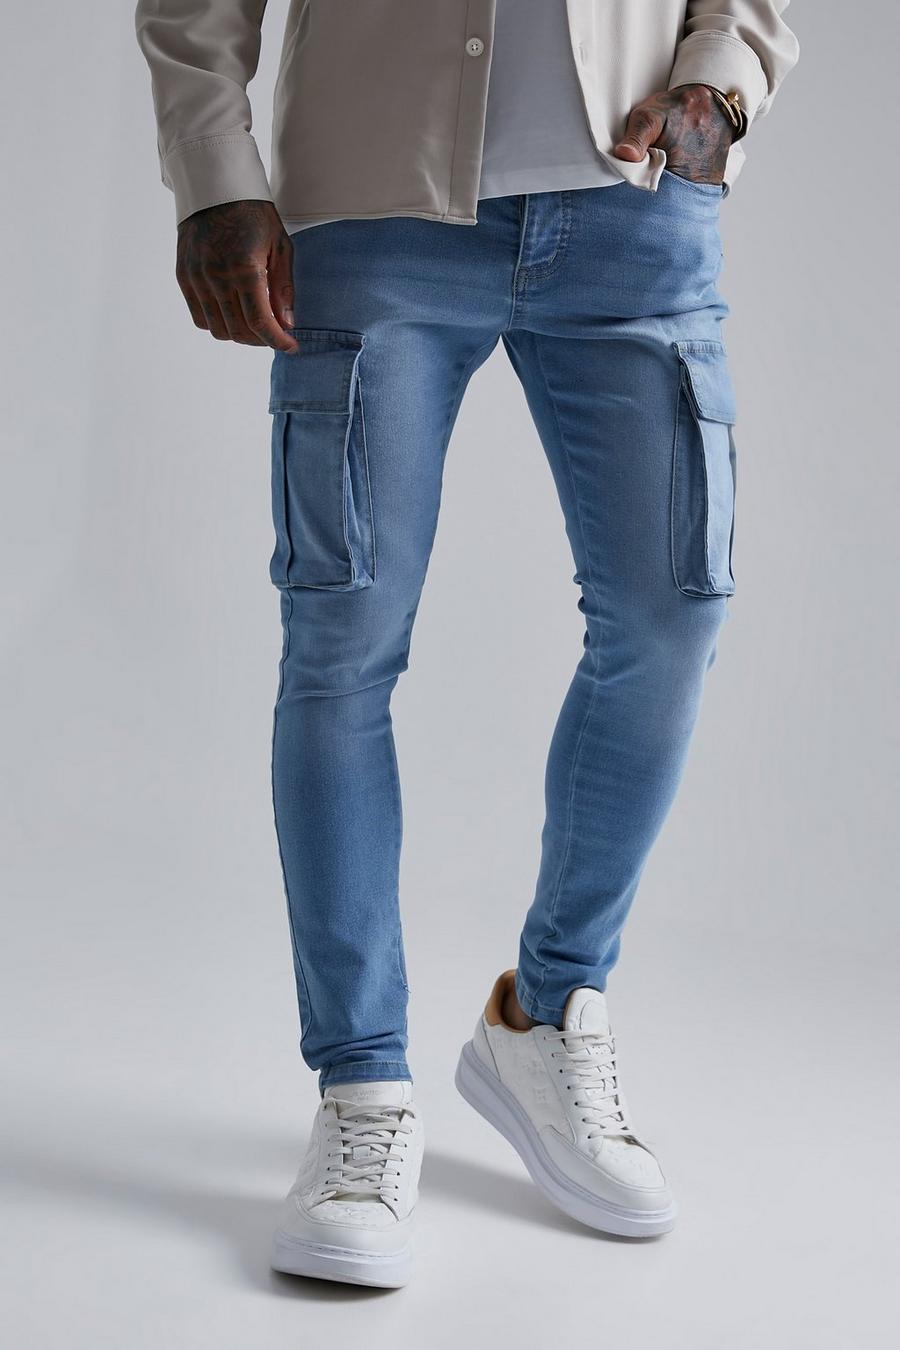 Men's Blue Cargo Jeans Skinny Fit Stonewashed Denim Pants, FREE FAST  DELIVERY